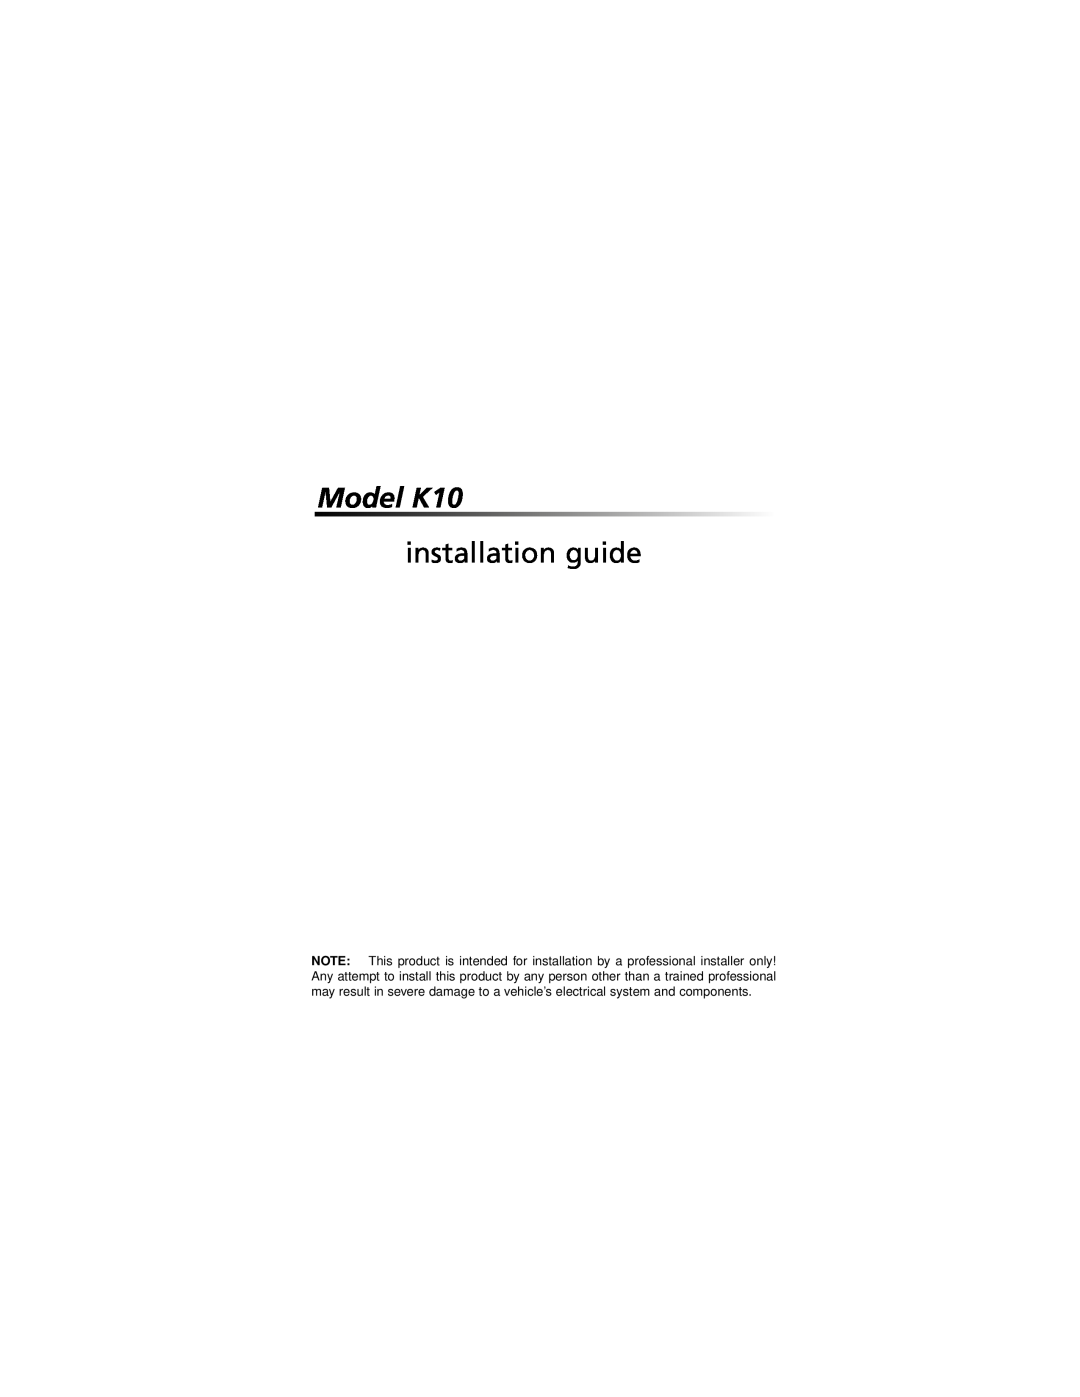 Directed Electronics manual Model K10, installation guide 